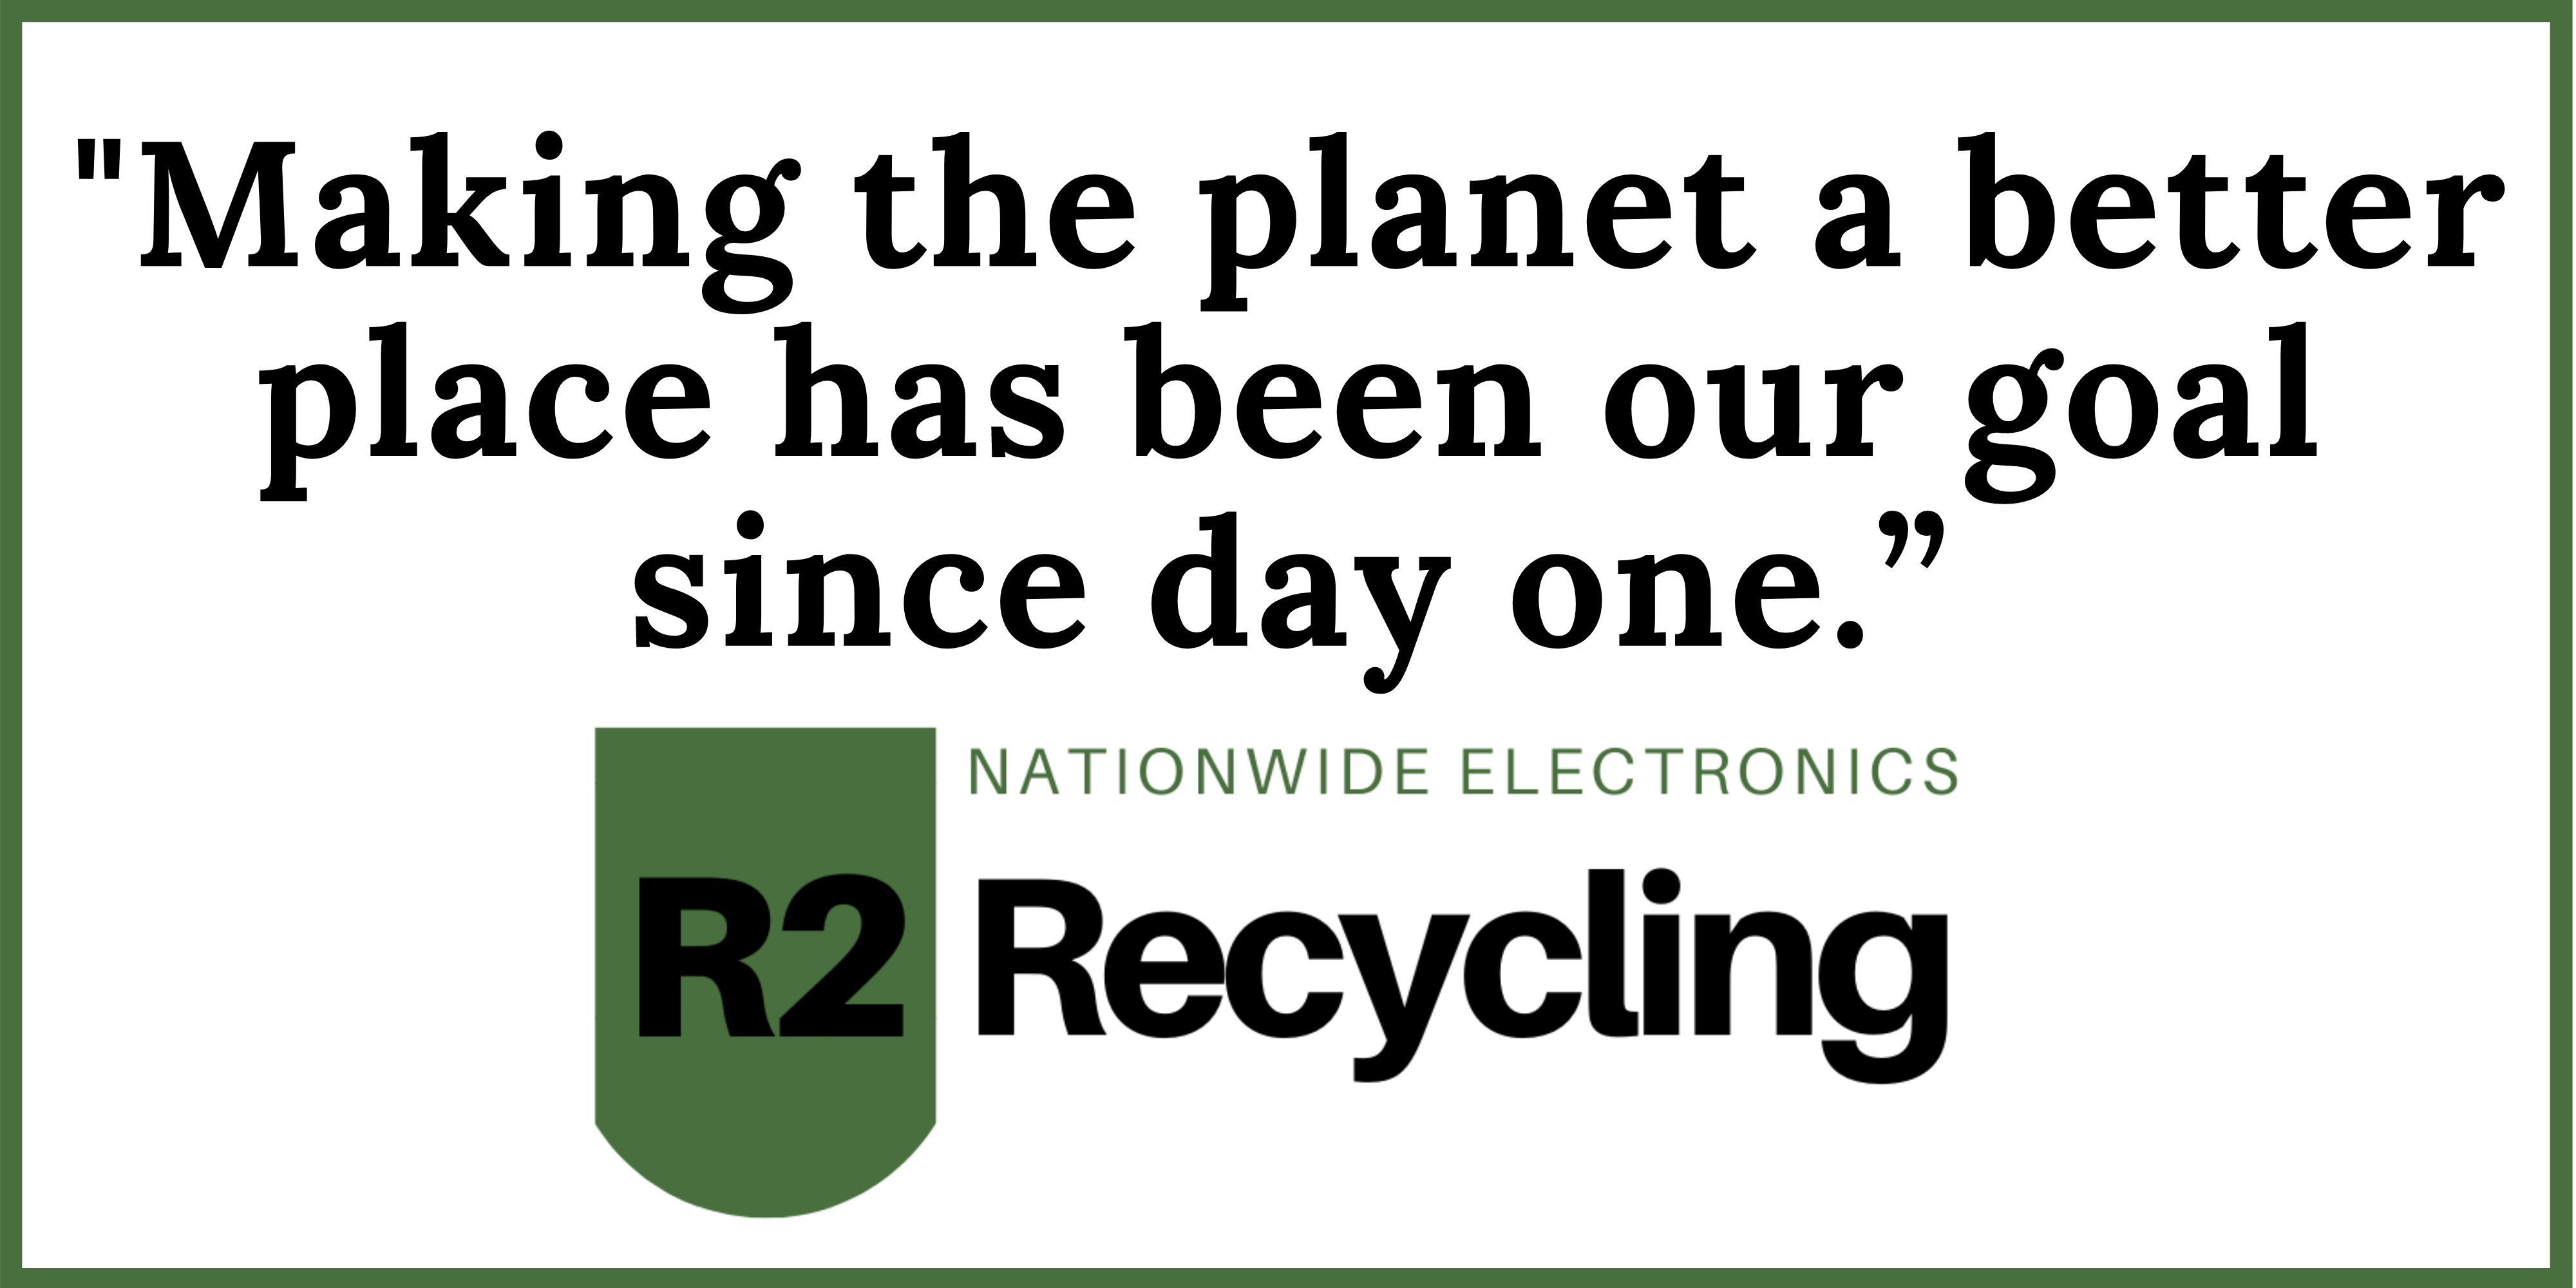 R2 Recycling, Wednesday, March 31, 2021, Press release picture